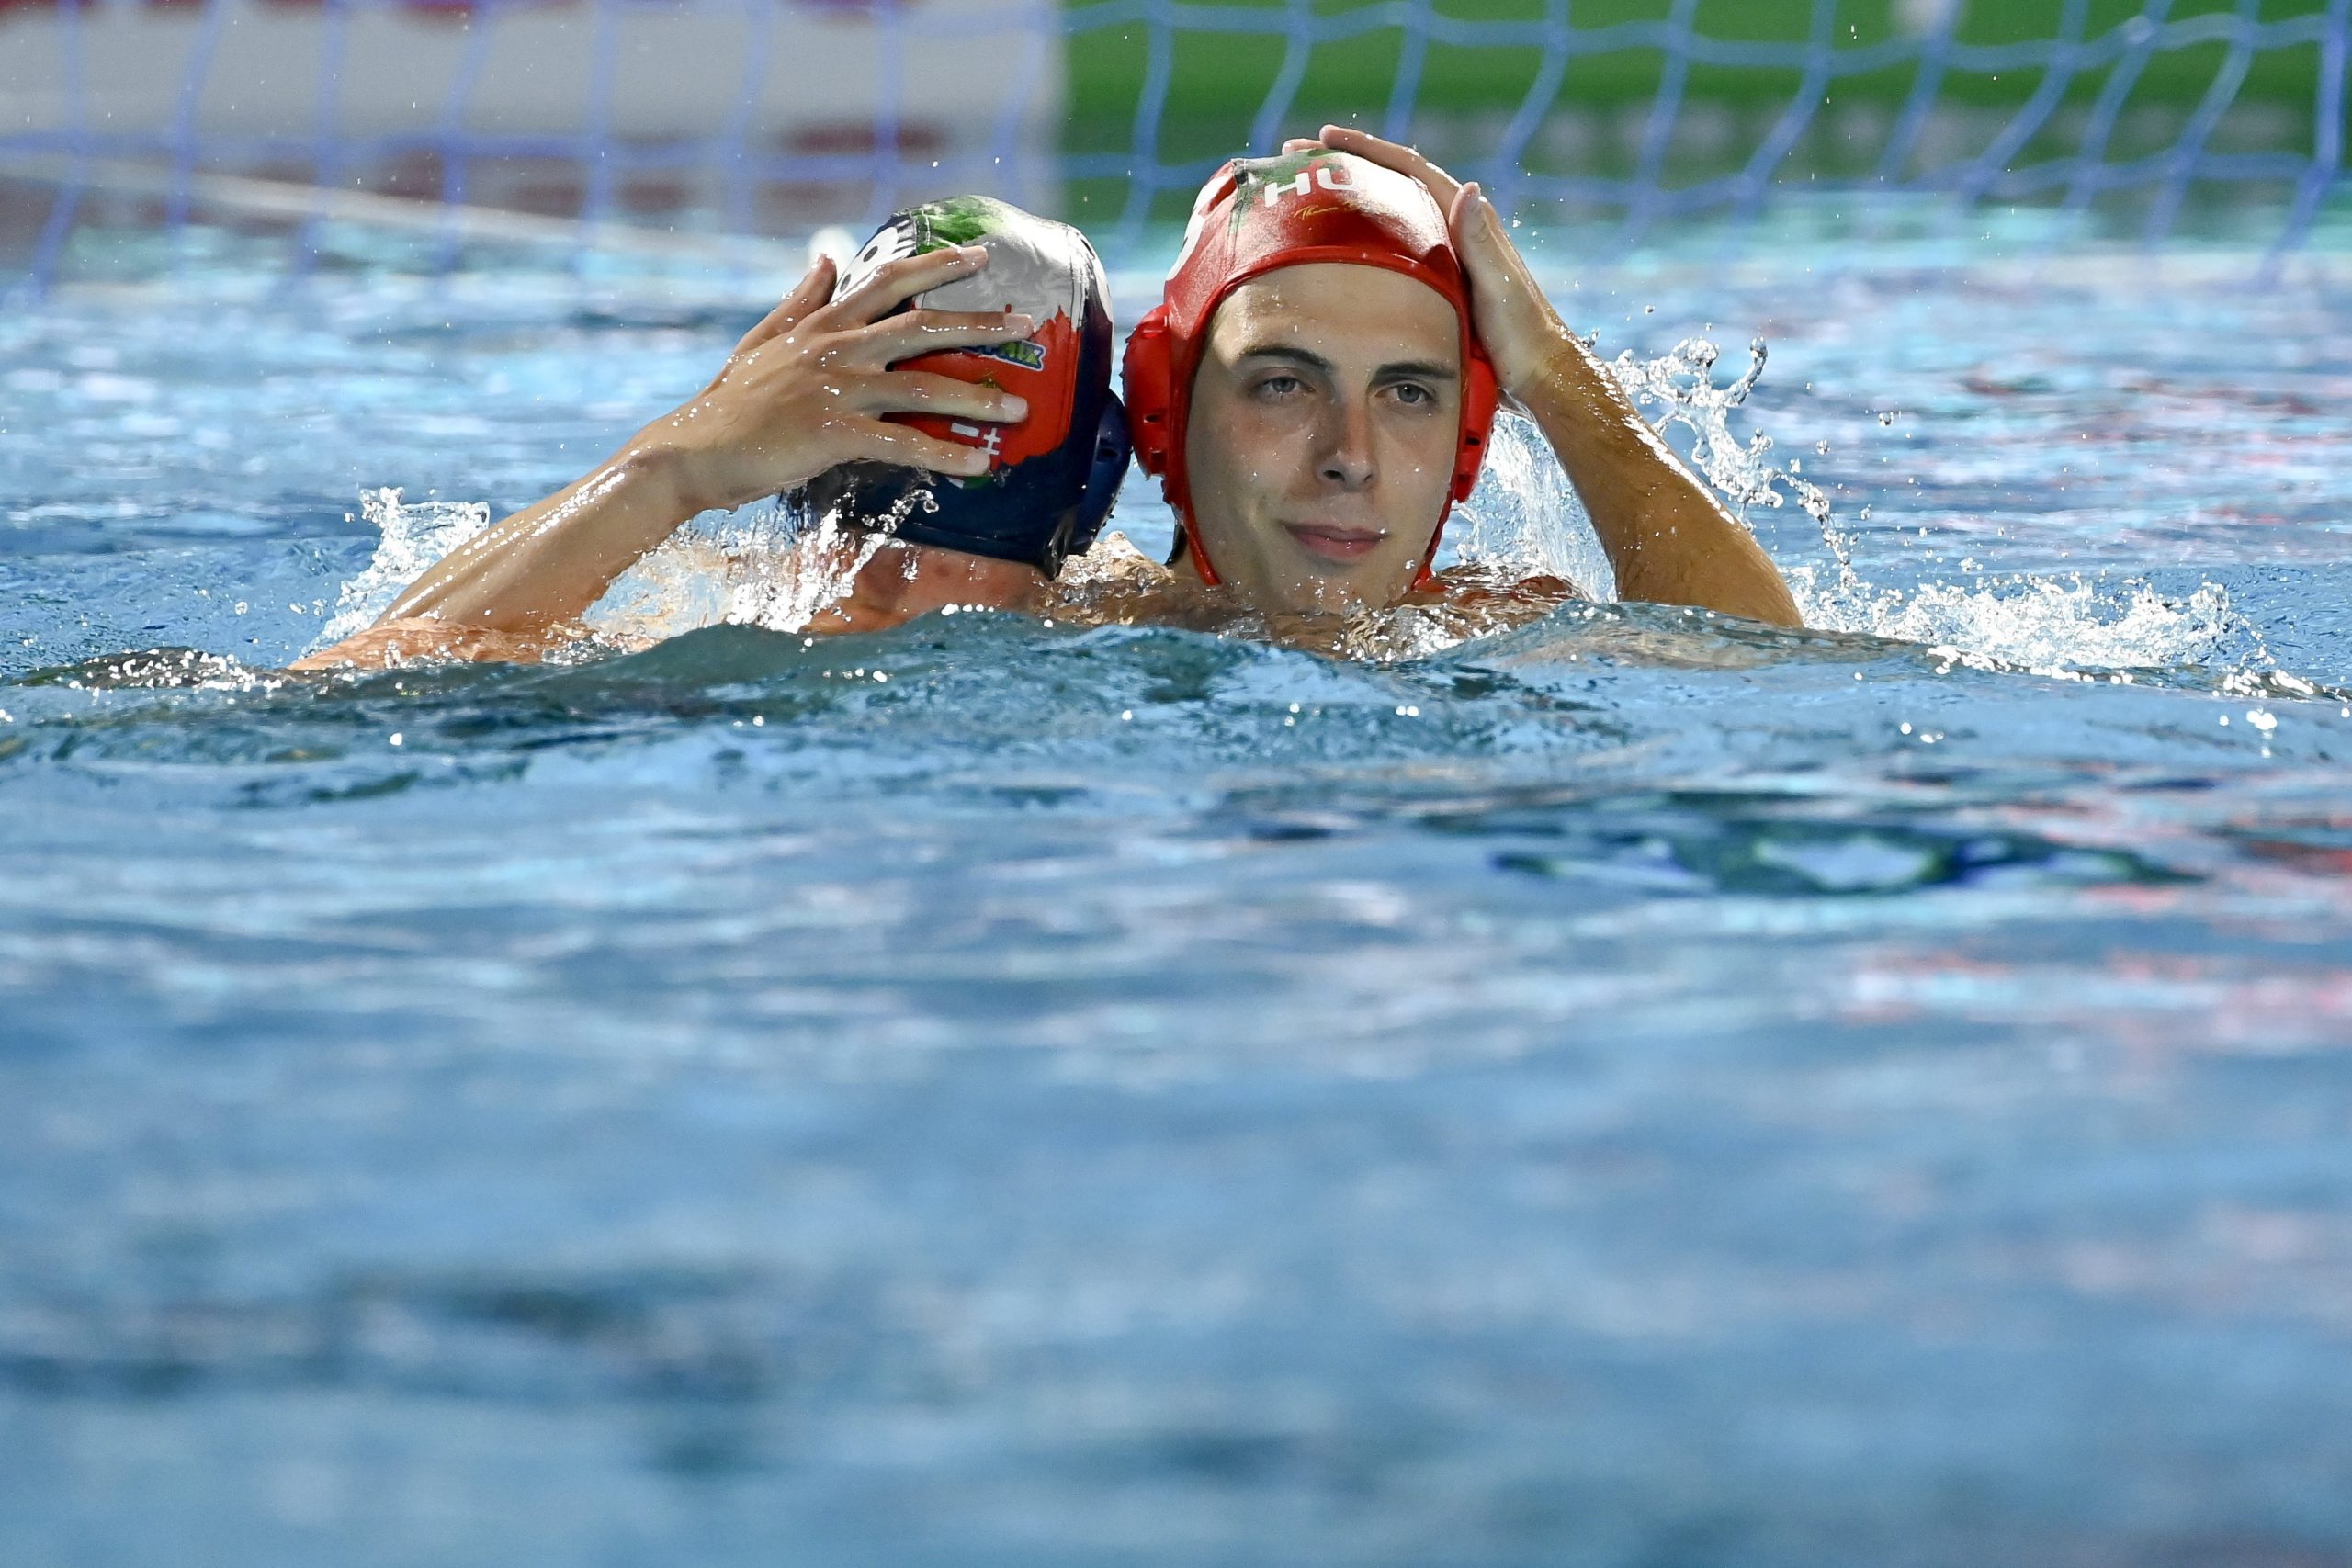 Hungary's Men’s Water Polo Team Secures Victory over Montenegro